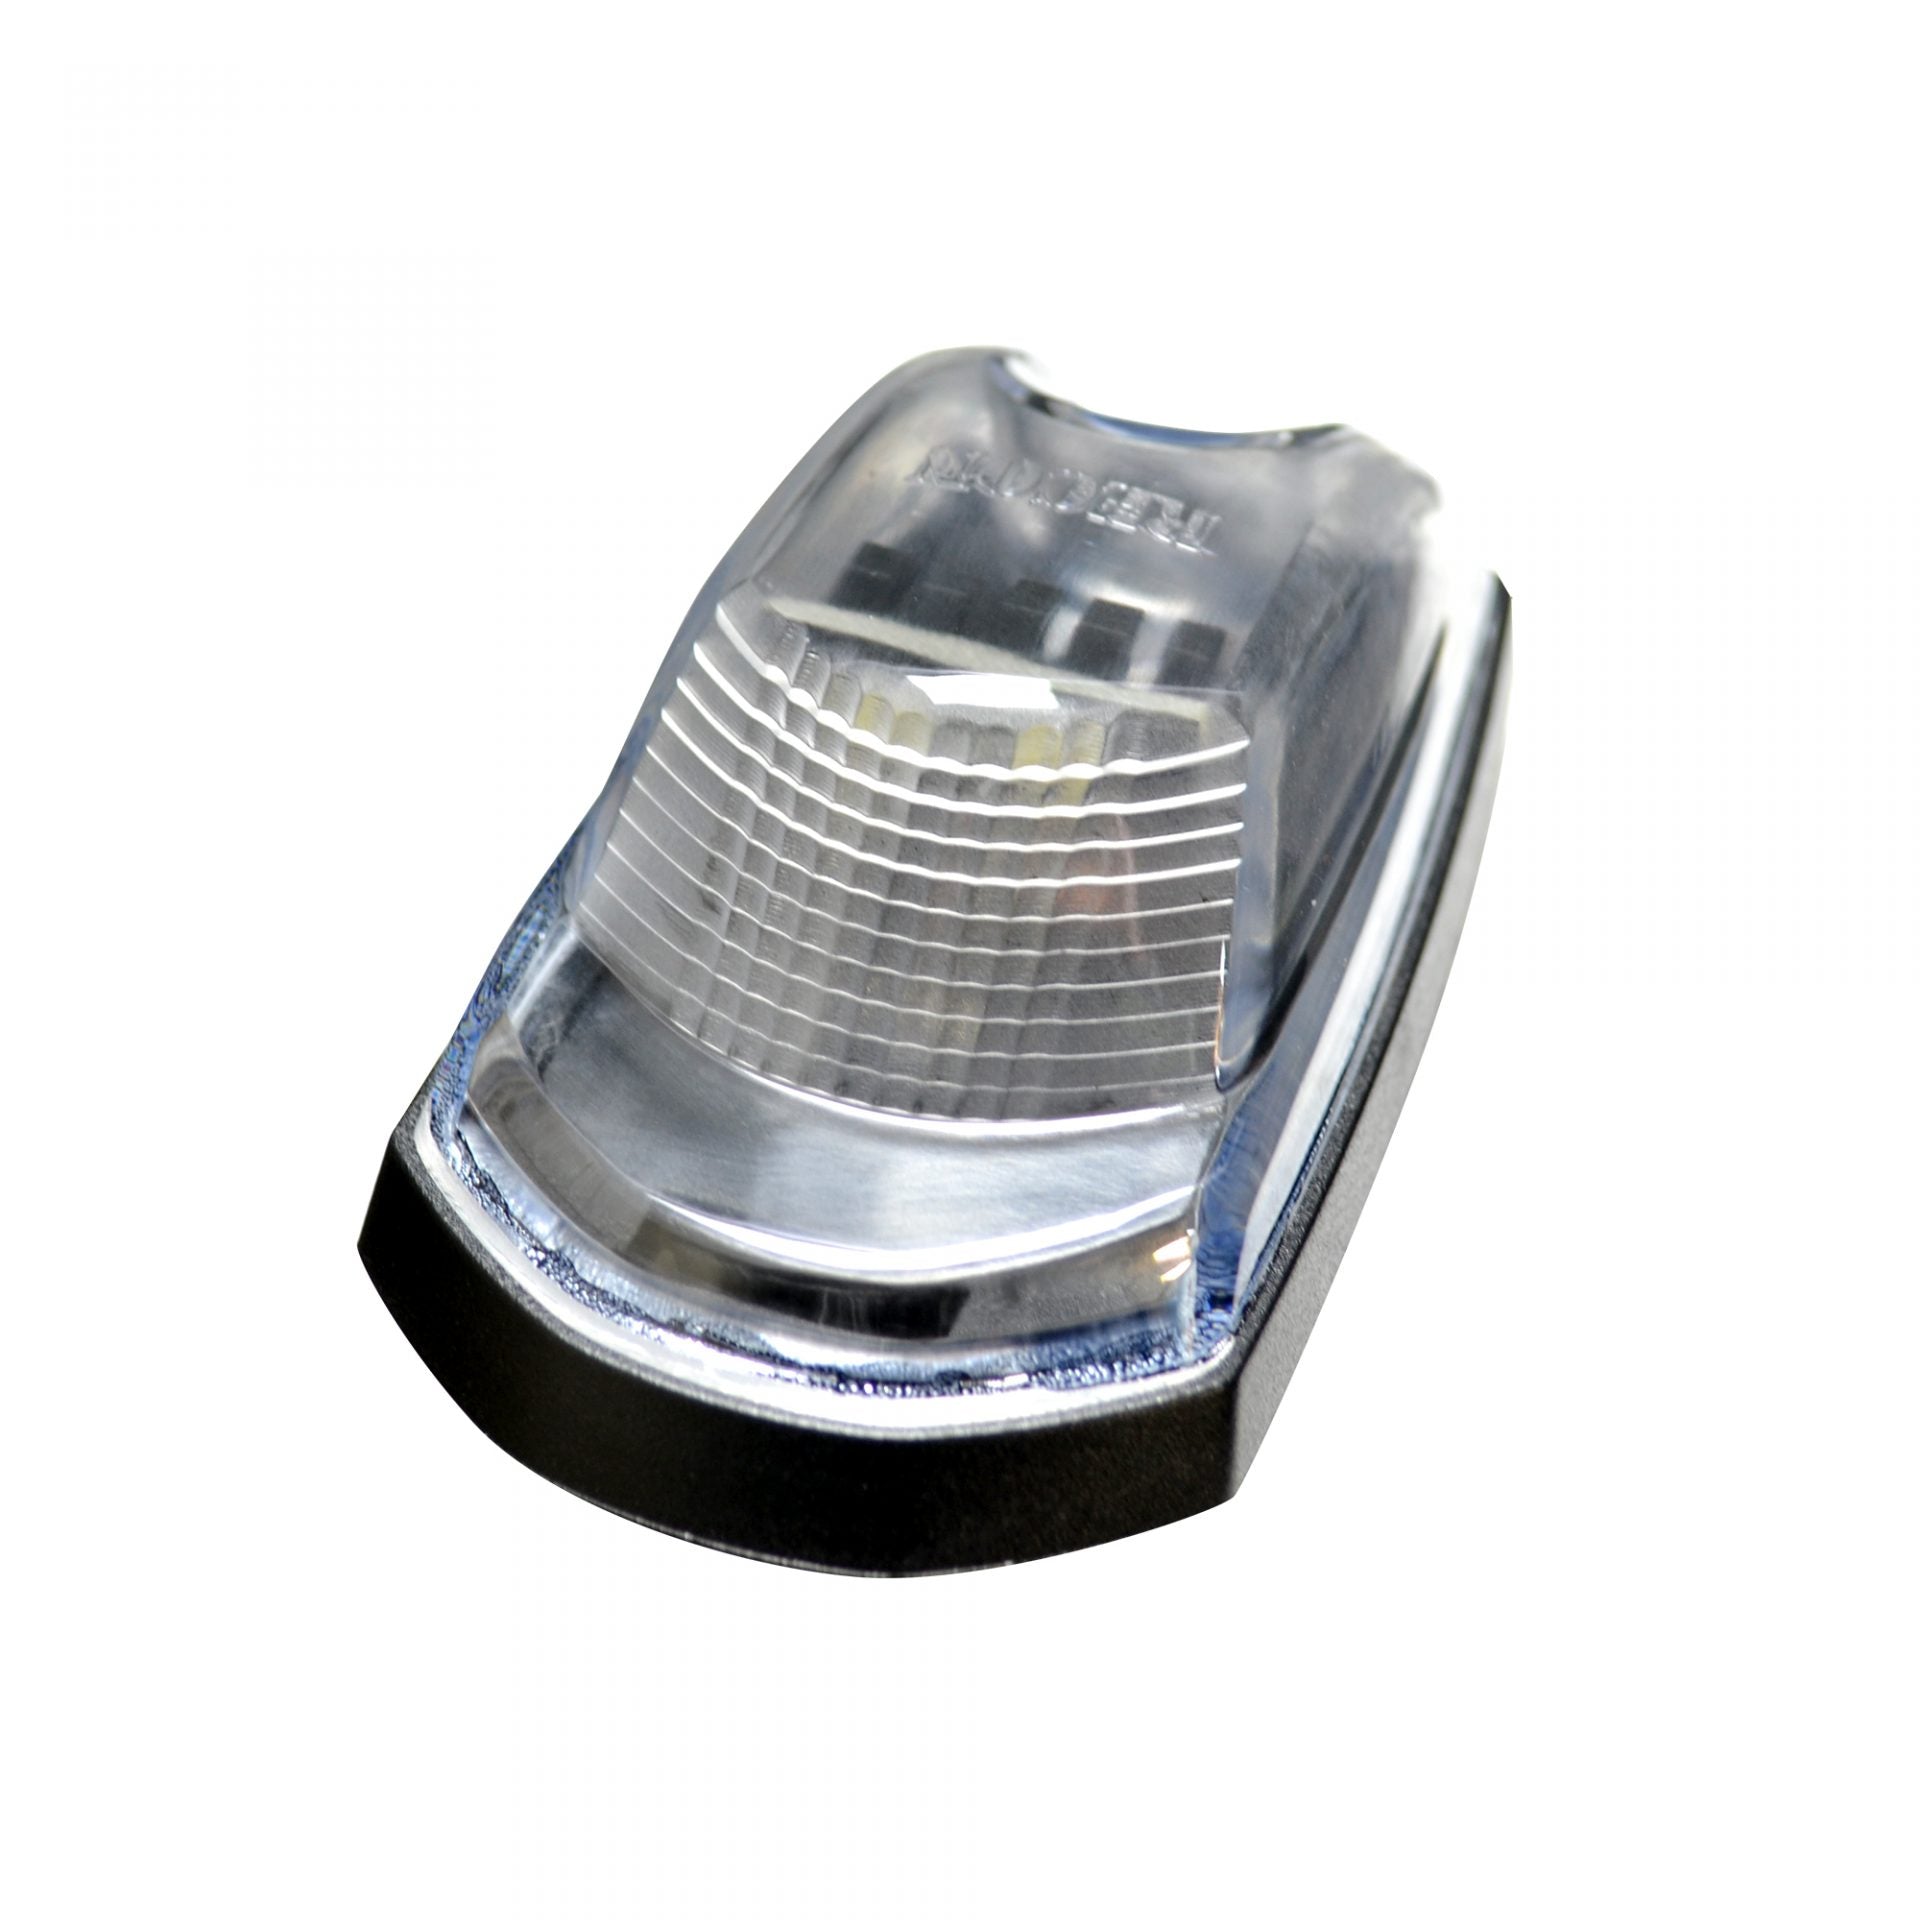 Ford Super Duty 17-19 5 Piece Cab Light LED Clear Lens in White